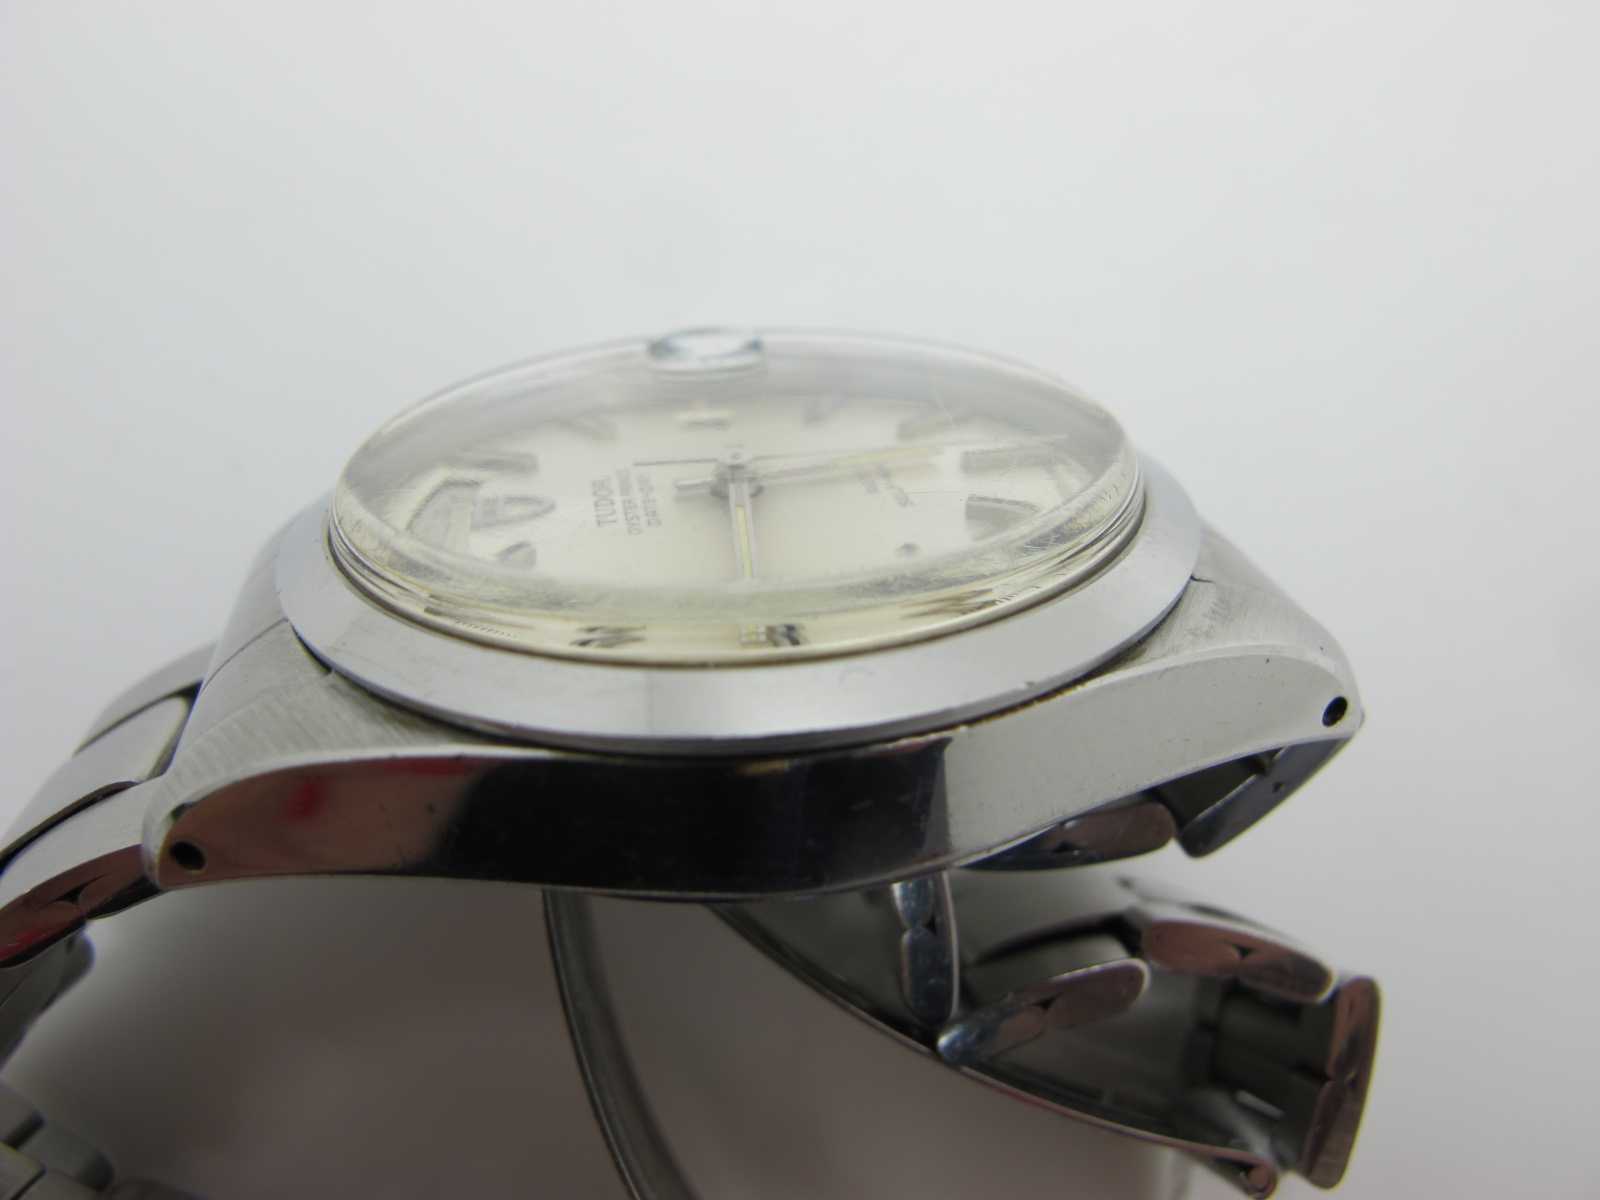 Tudor; A c.1980's Oyster Prince Date Day Stainless Steel Gent's Wristwatch, Ref: 70170, Serial No; - Image 13 of 15